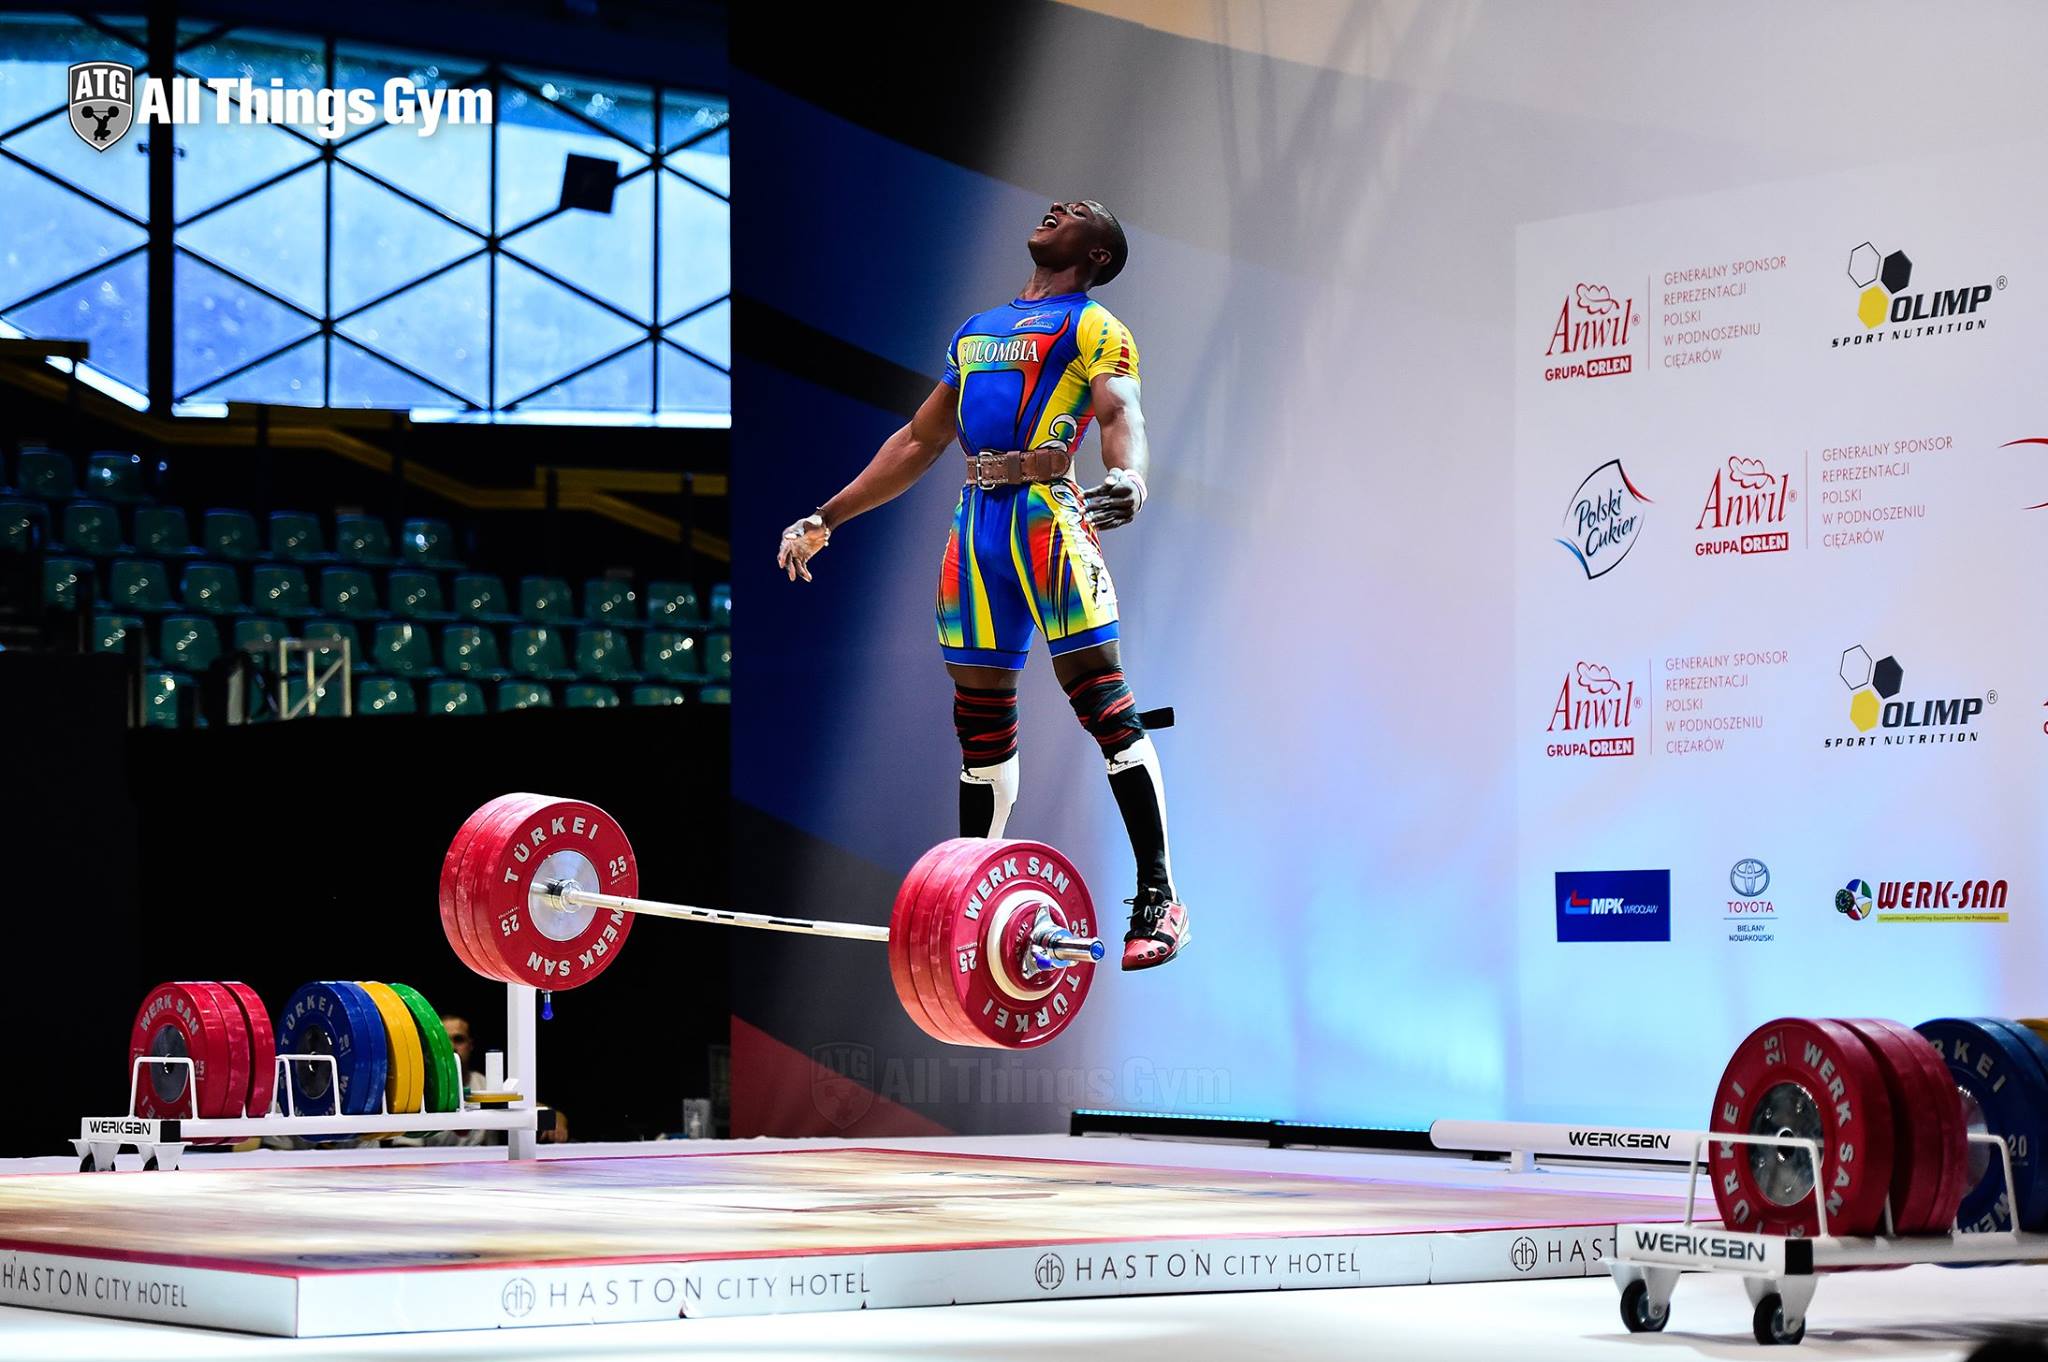 funny picture of weight lift competitor appearing to fly away in a picture as he drops the barbell